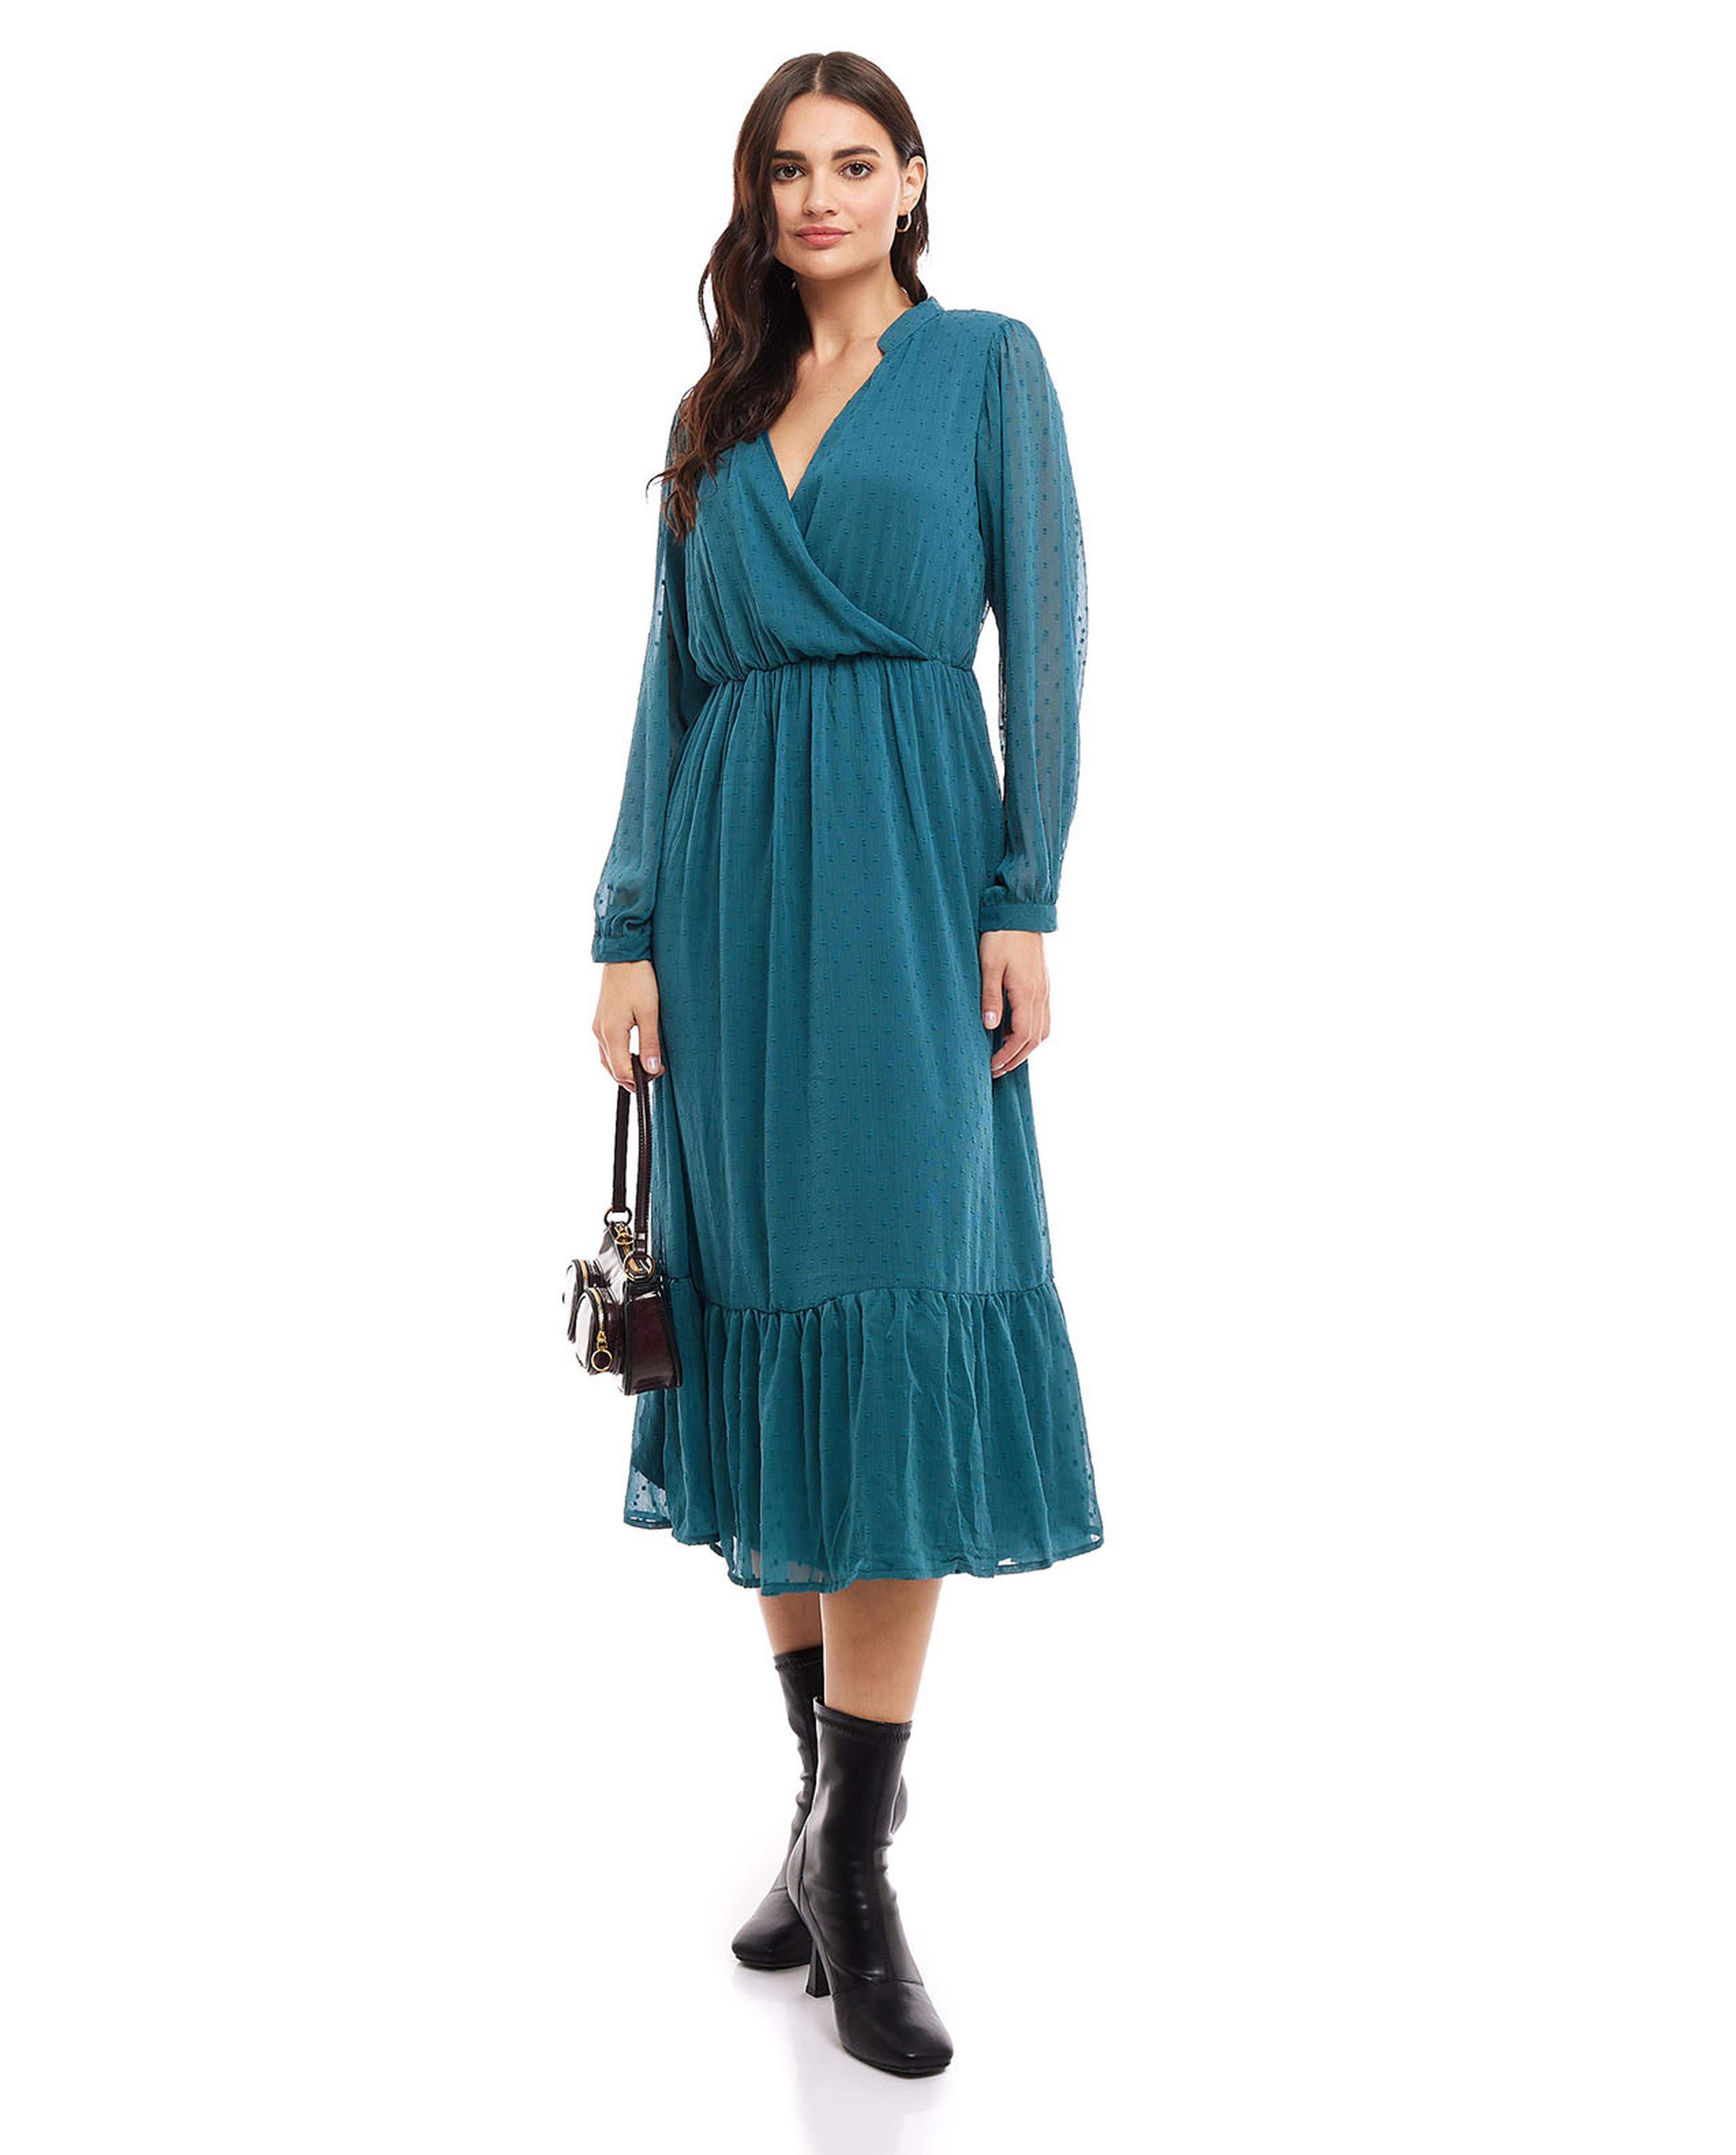 Woven Midi Dress with V-Neck and Long Sleeves